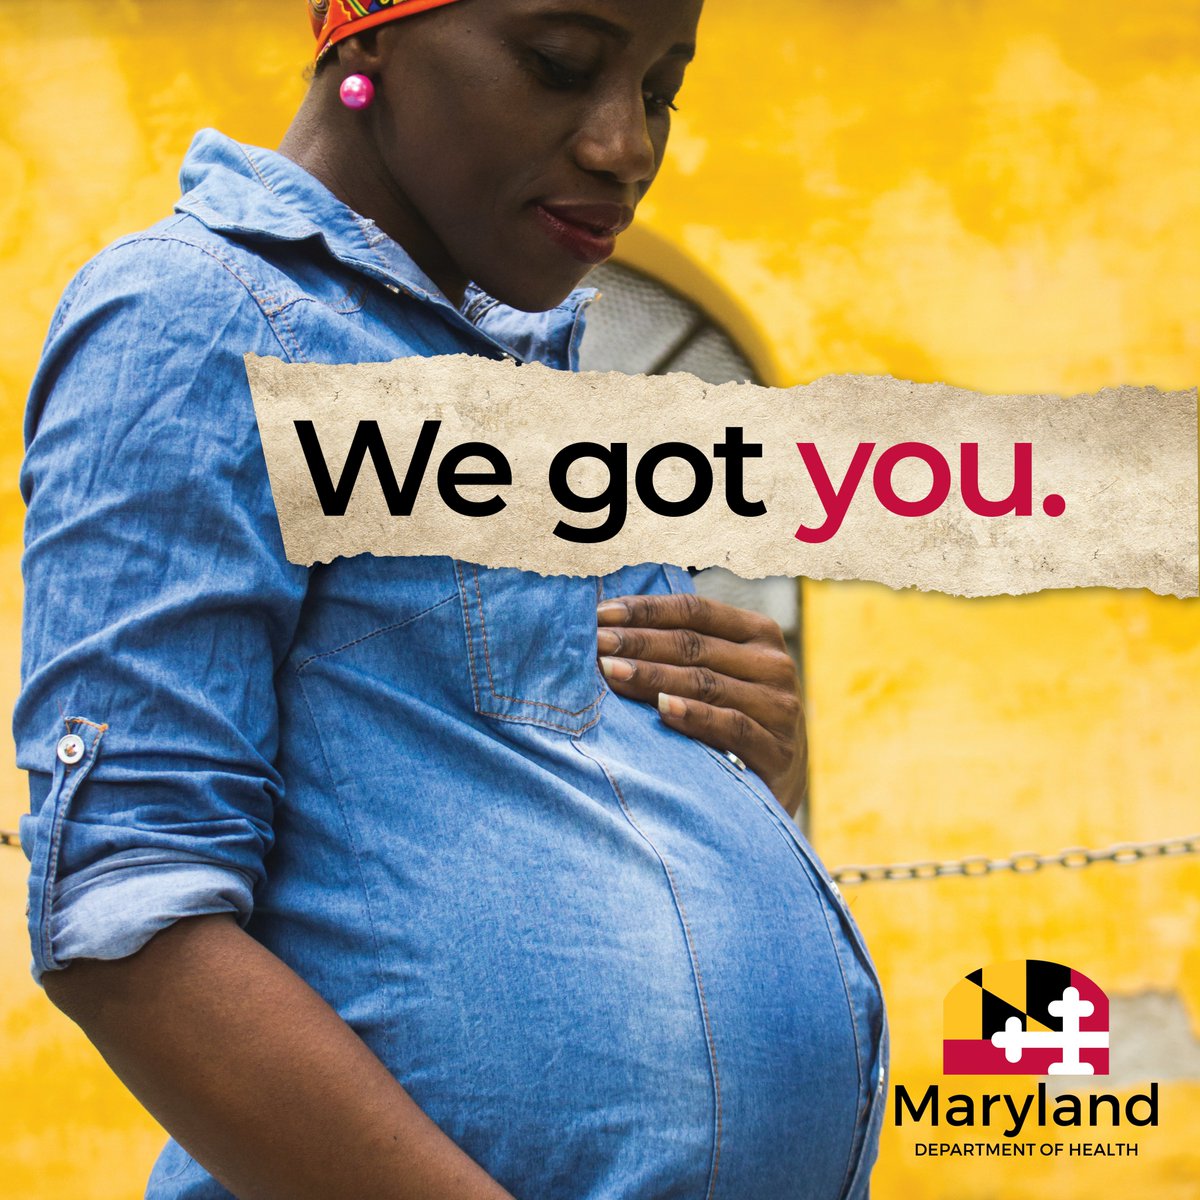 If you have health insurance through Maryland Medicaid, are pregnant and use or have used opioids, you could qualify for additional support for you and your baby. Learn more about the MOM Program and enroll: bit.ly/3WqmYAY #MarylandMedicaid